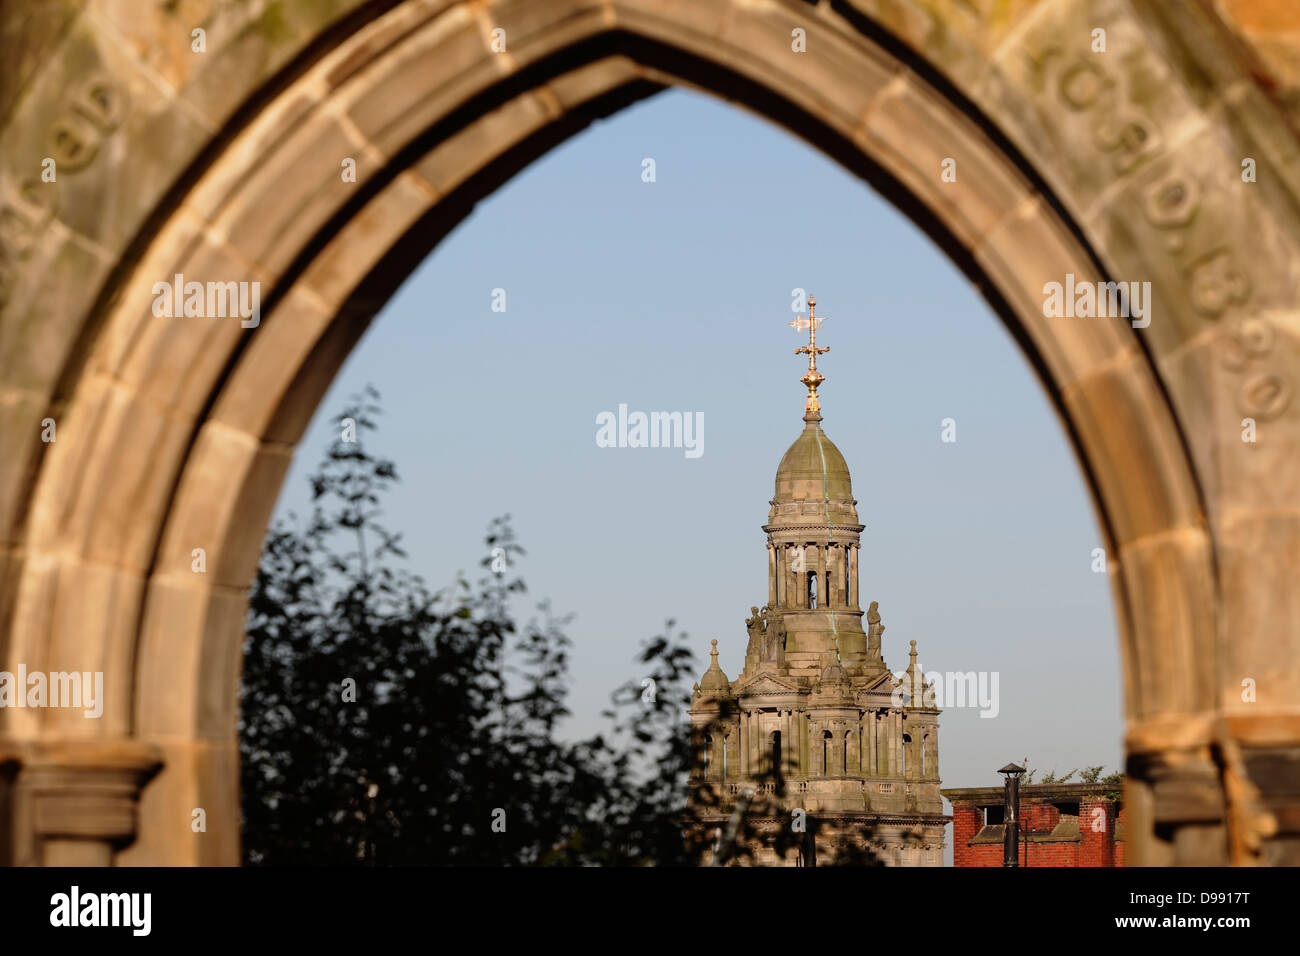 Glasgow City Chambers dome viewed through Rottenrow Arch in Glasgow, Scotland, UK Stock Photo